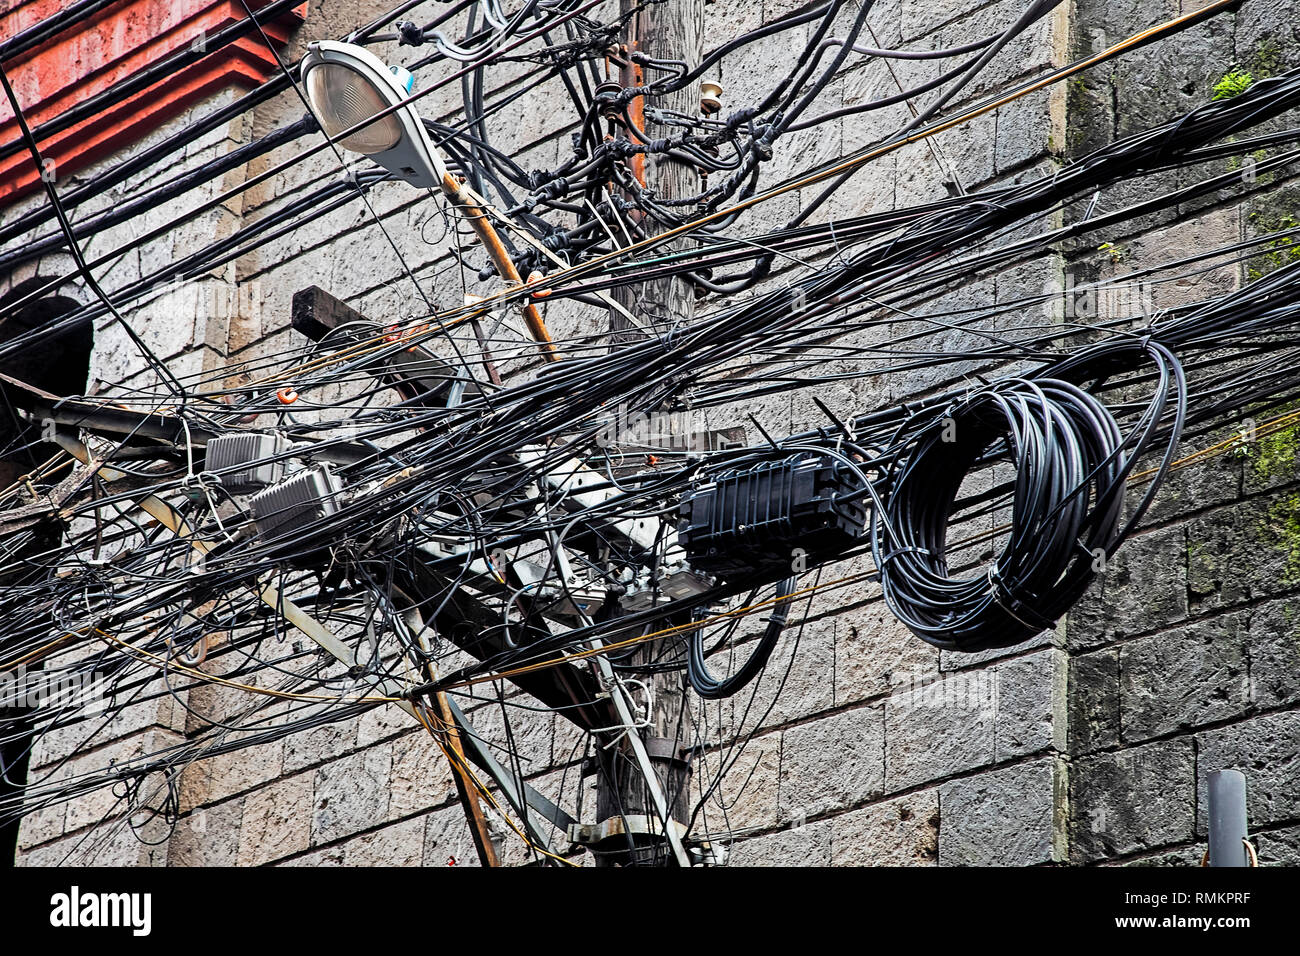 Massive Tangle of cables and wires in the Chinatown area of the city of Manila, Philippines Stock Photo